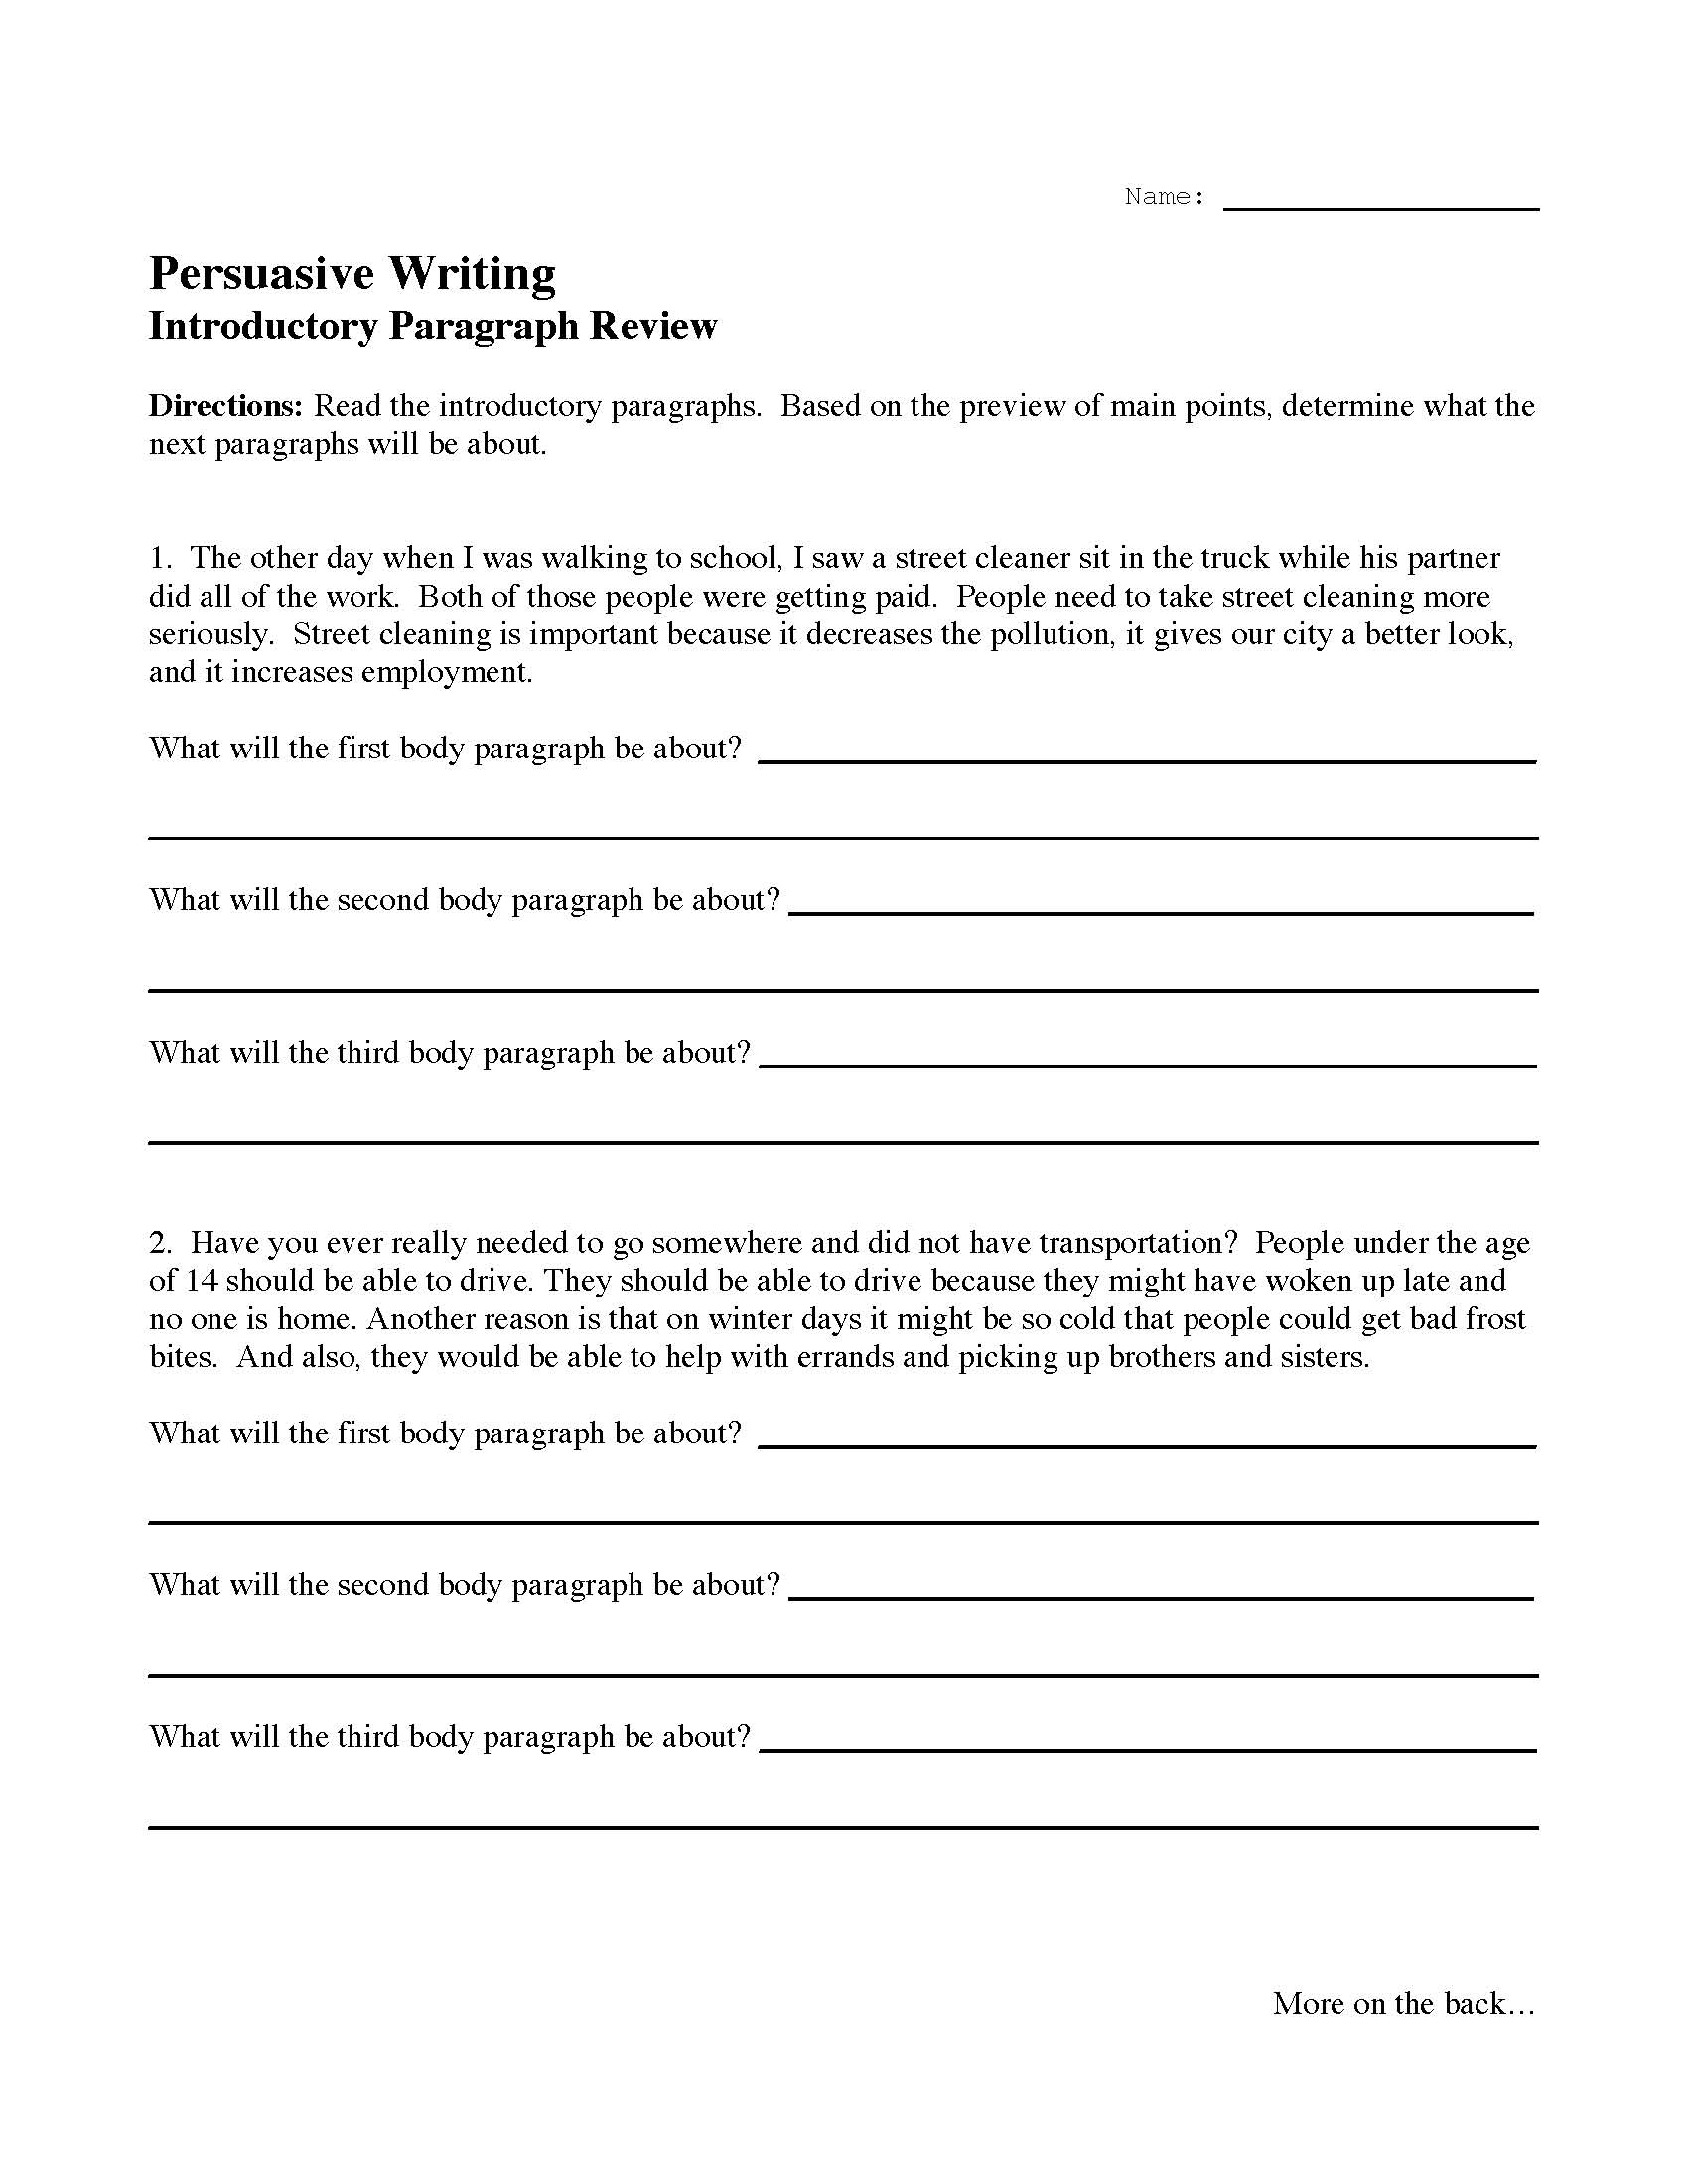 introductory-paragraph-review-activity-preview